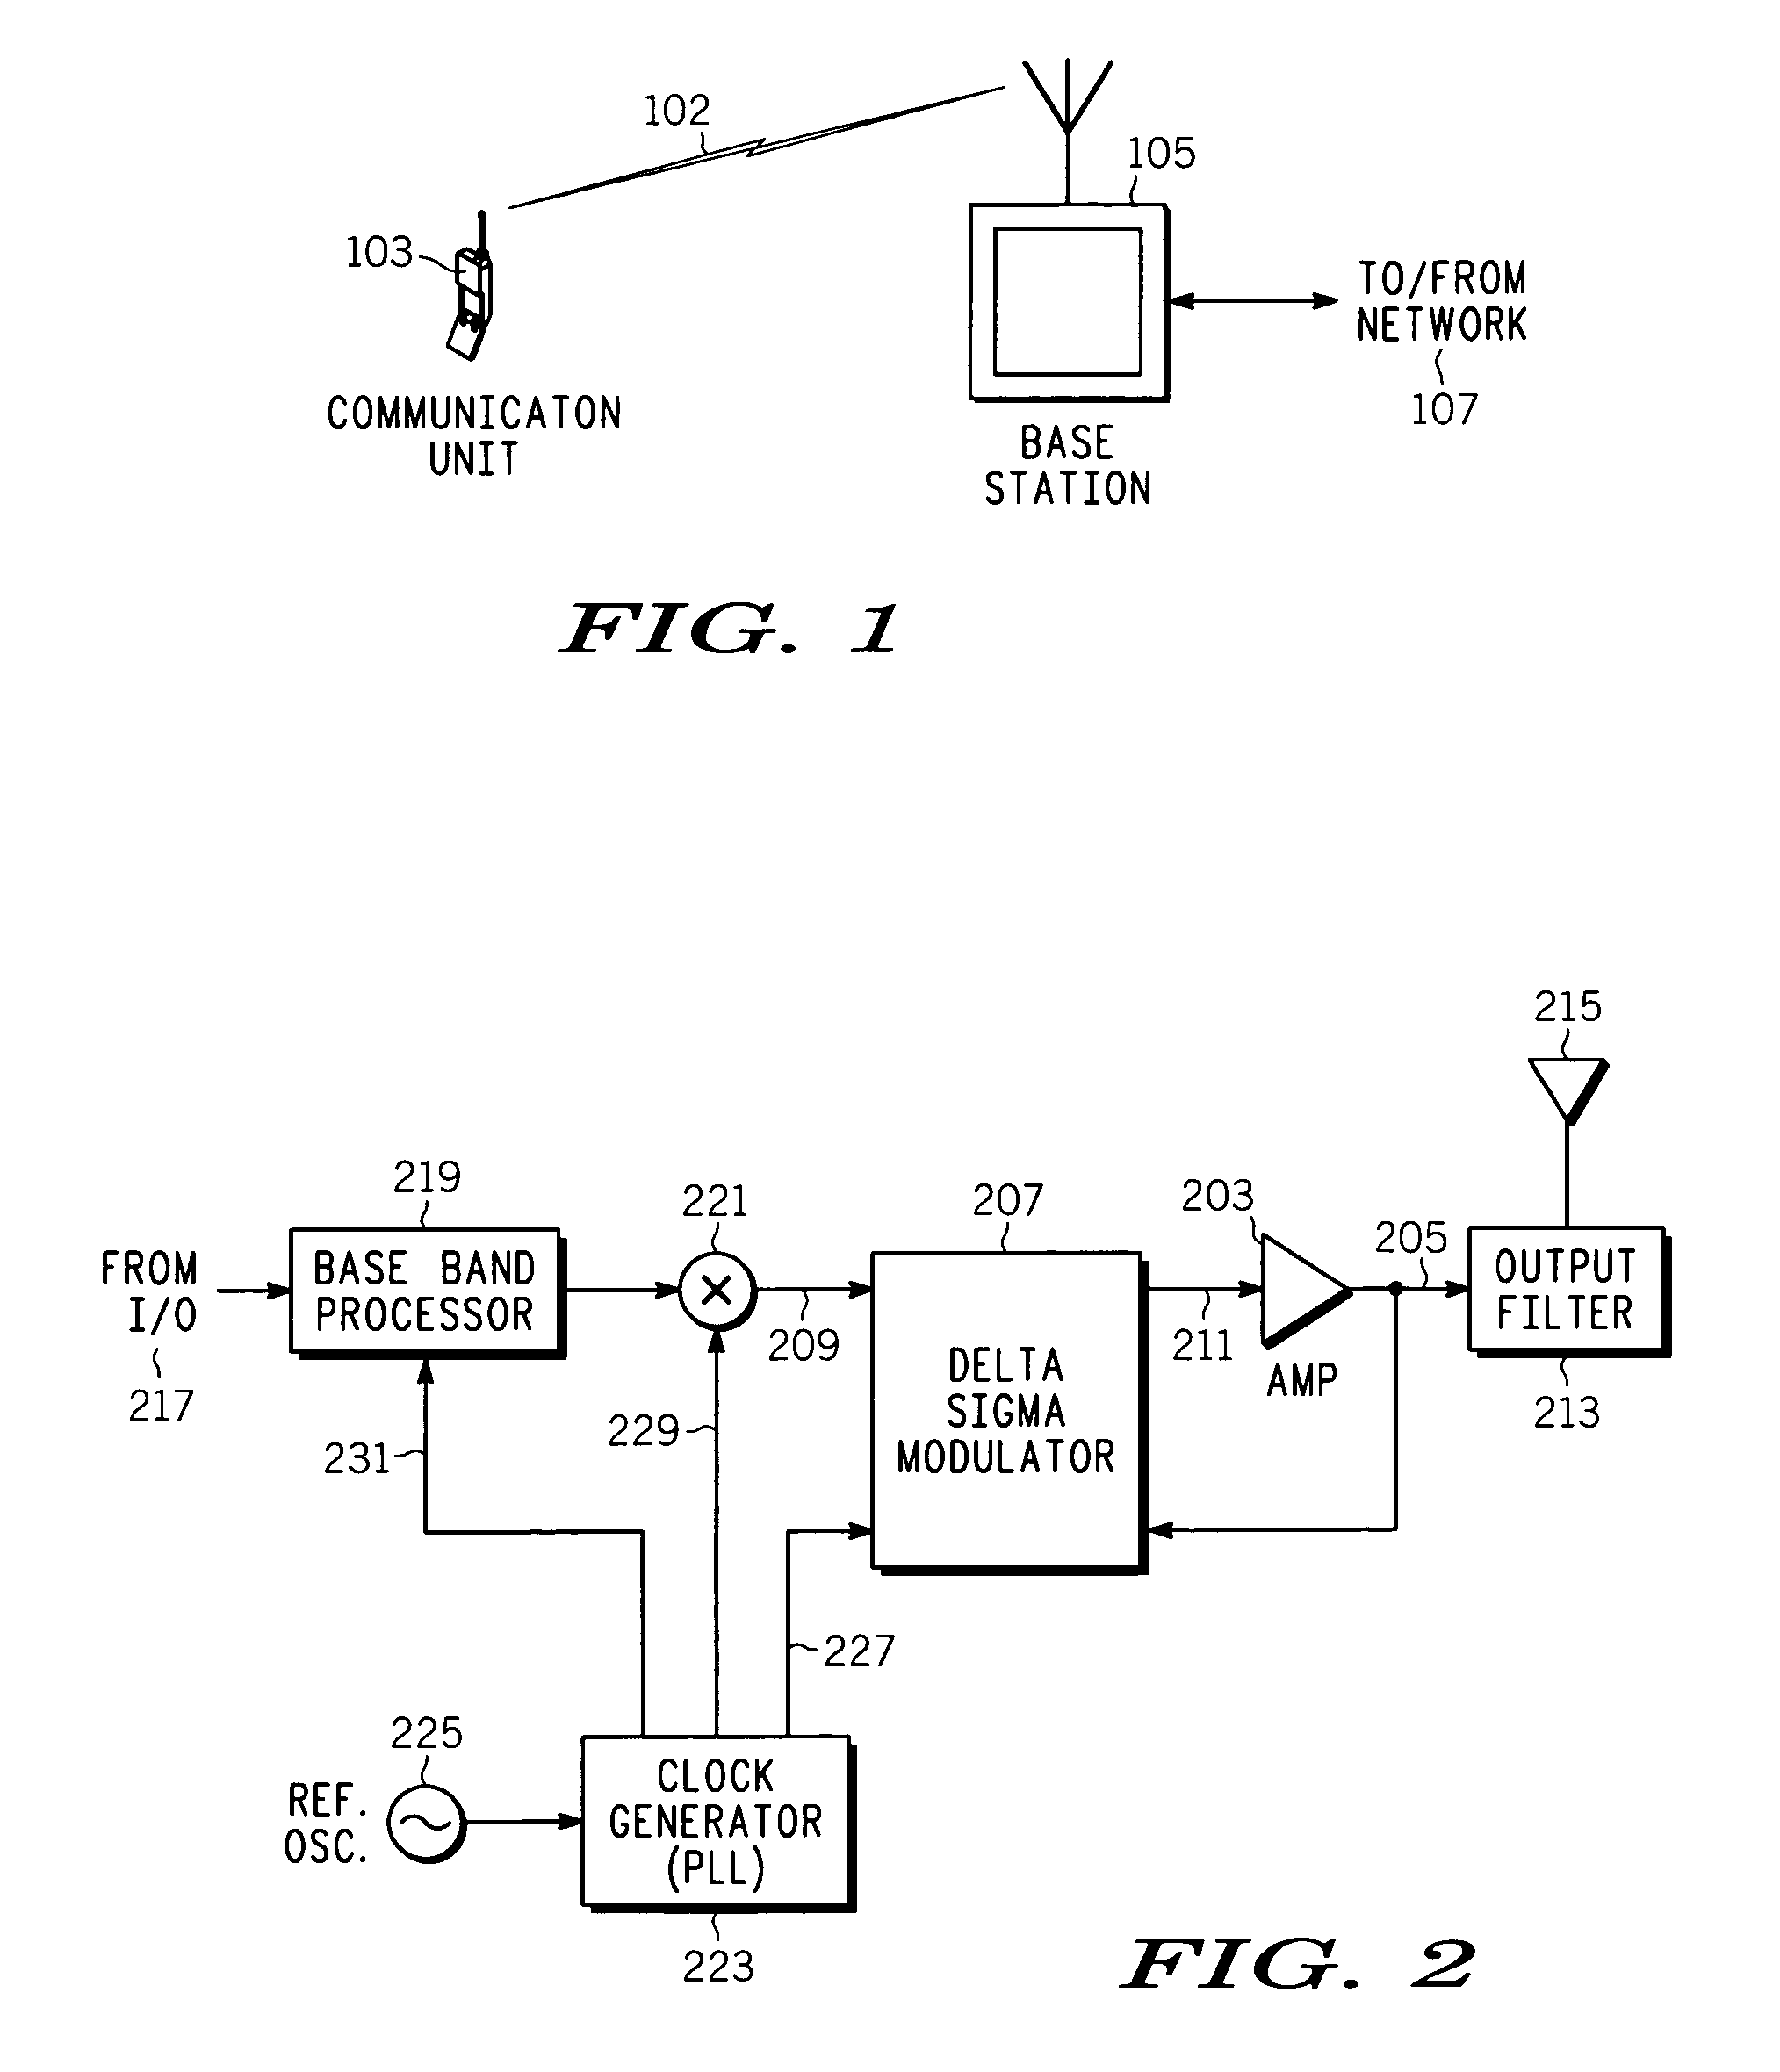 Switching power amplifier using a frequency translating delta sigma modulator